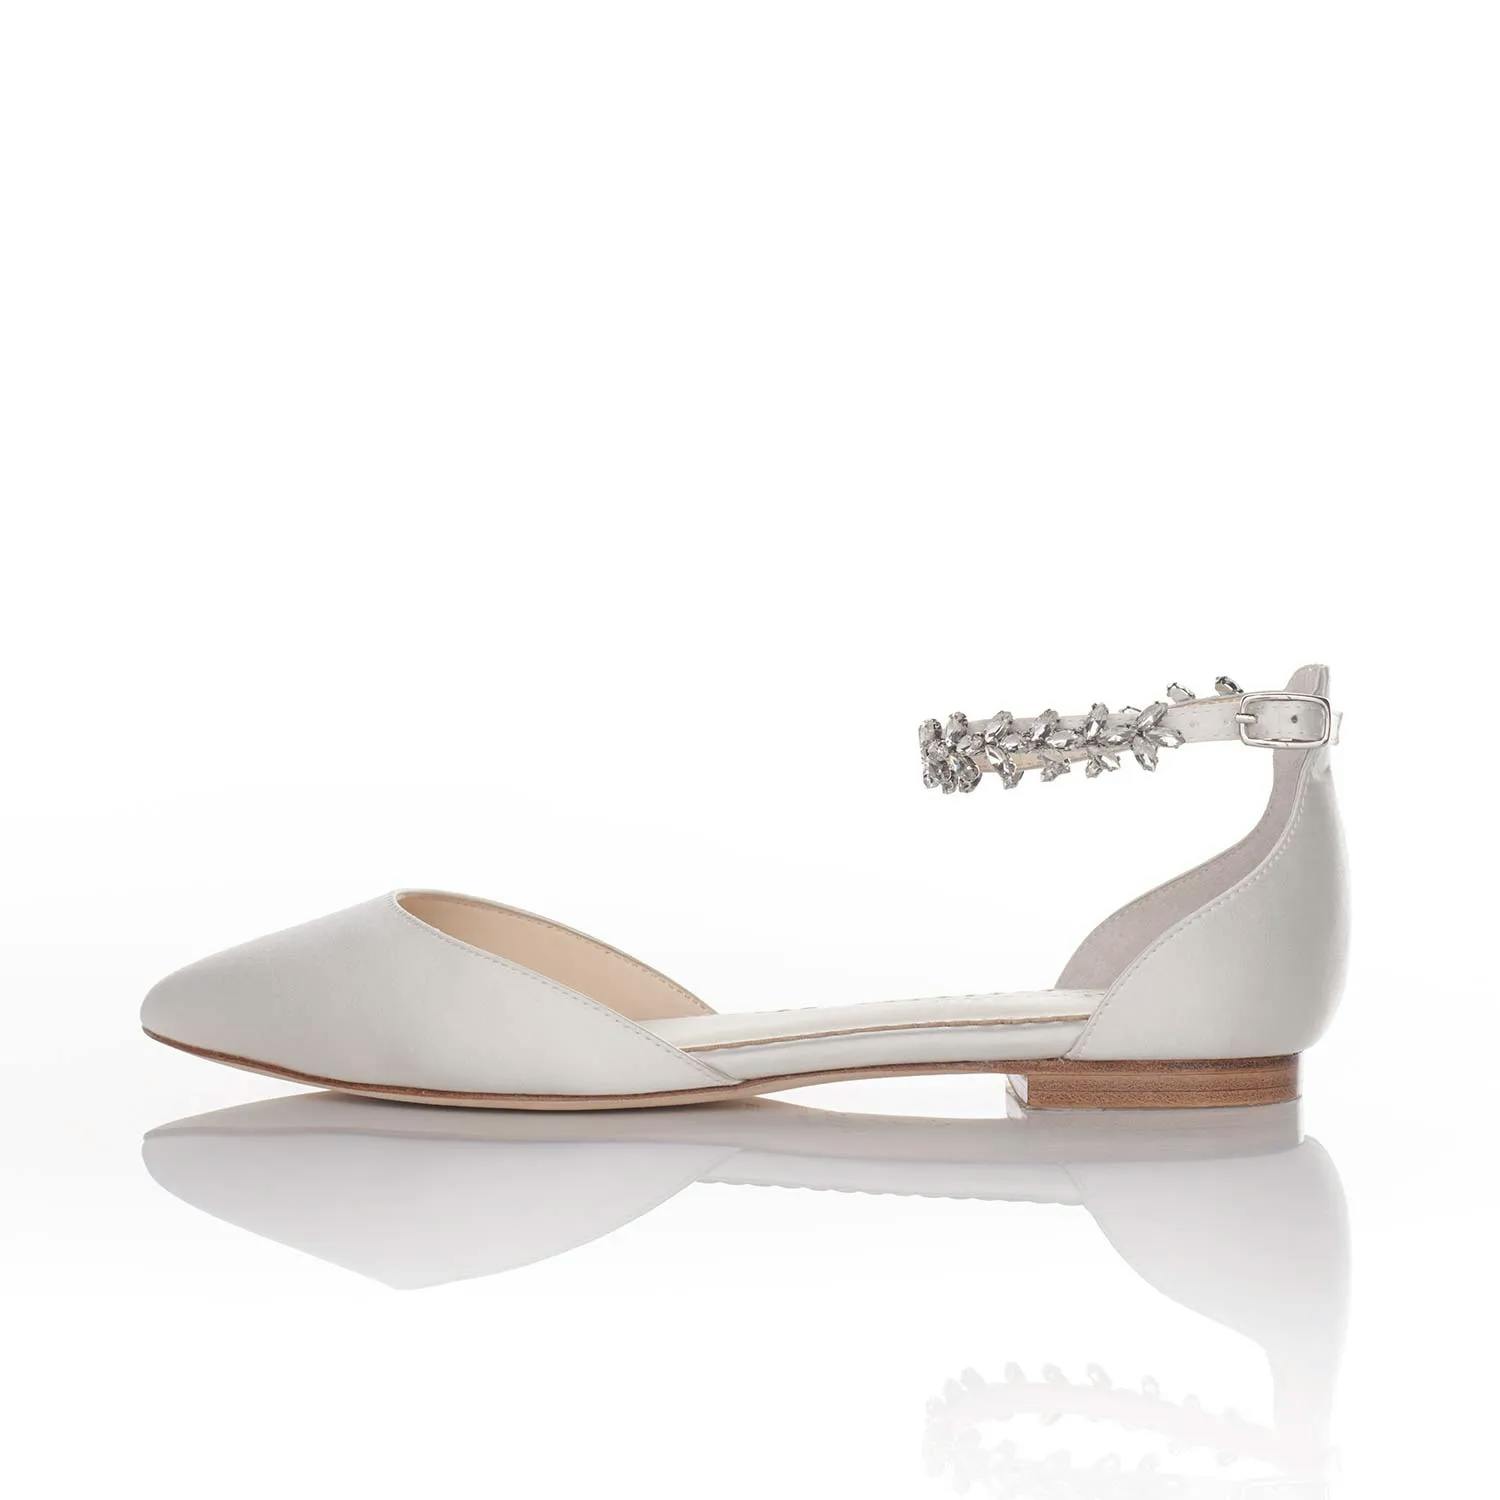 A white flat shoe with a closed pointed toe and a low wooden heel. The shoe features a decorative ankle strap adorned with intricate silver floral embellishments, fastened with a small buckle. The background is plain white.